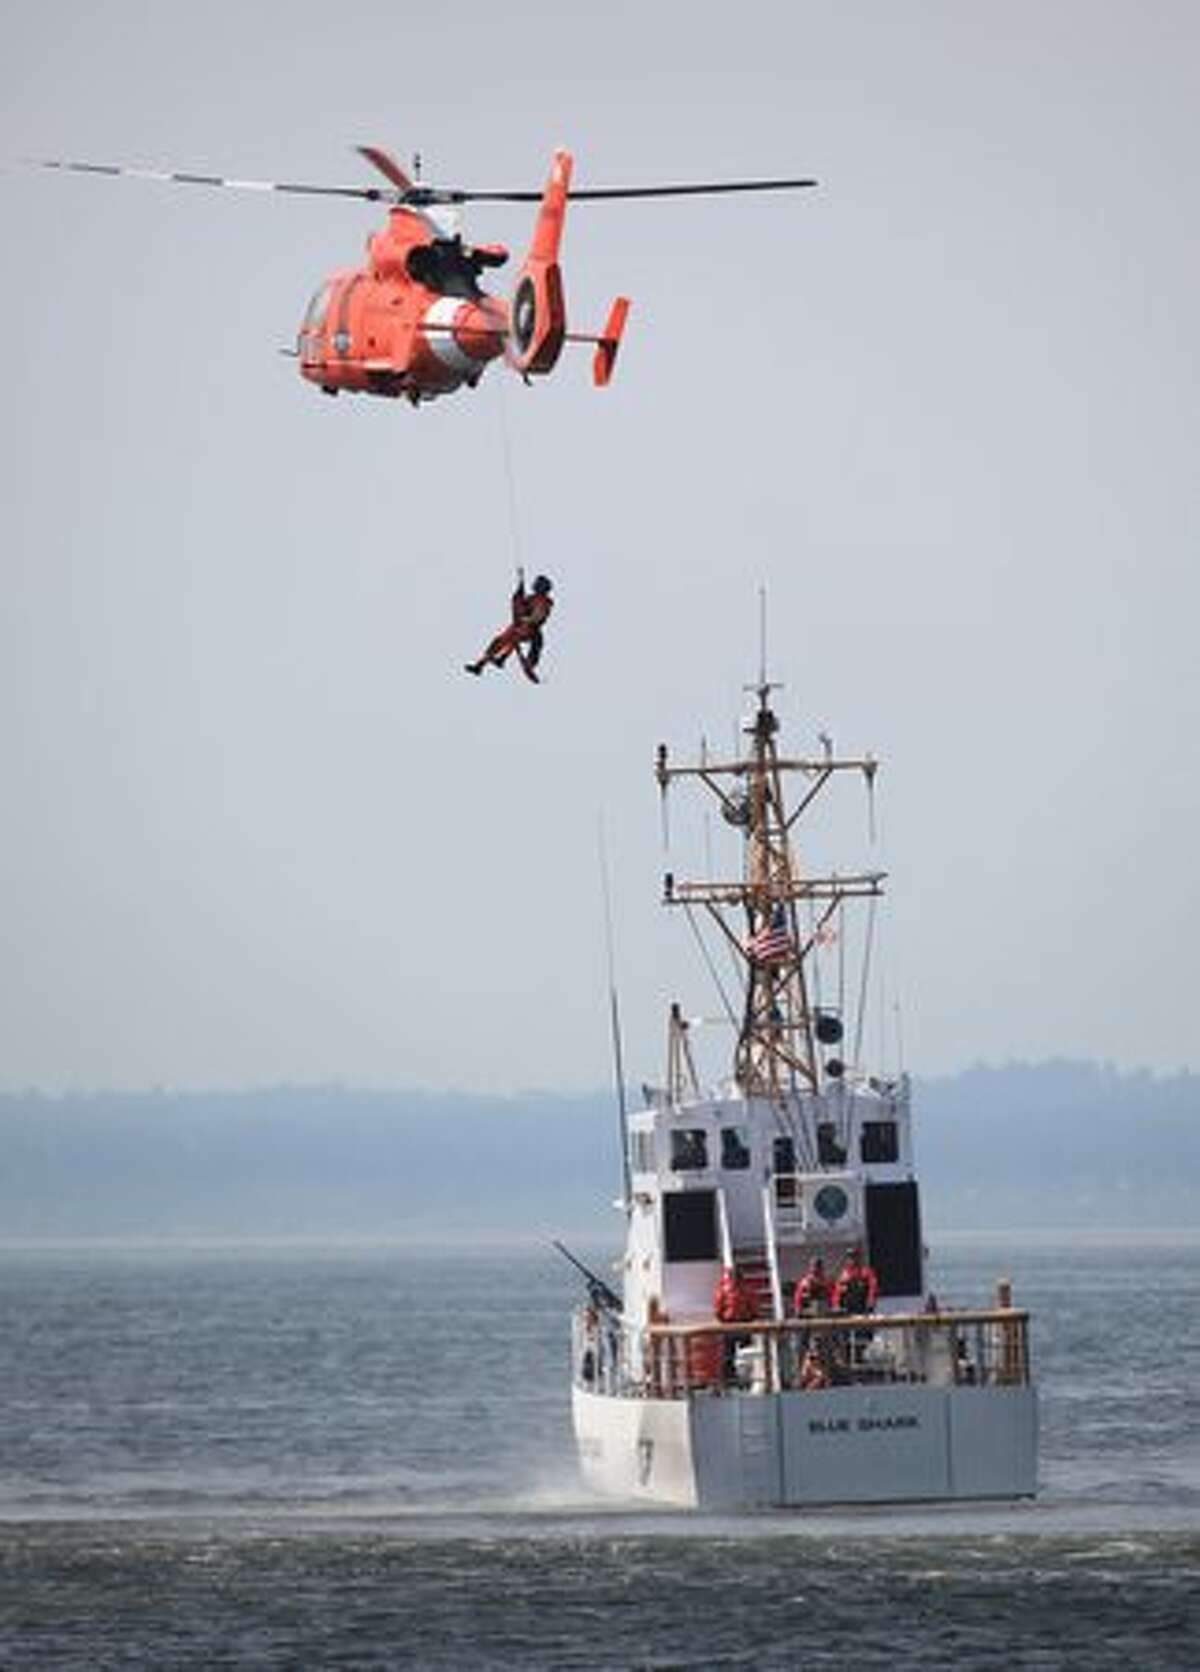 A U.S. Coast Guardsmen performs an exercise during U.S. Navy Fleet Week's Parade of Ships in Elliott Bay along the Seattle waterfront on Wednesday August 4, 2010. The parade is part of Seattle's annual Seafair celebration.